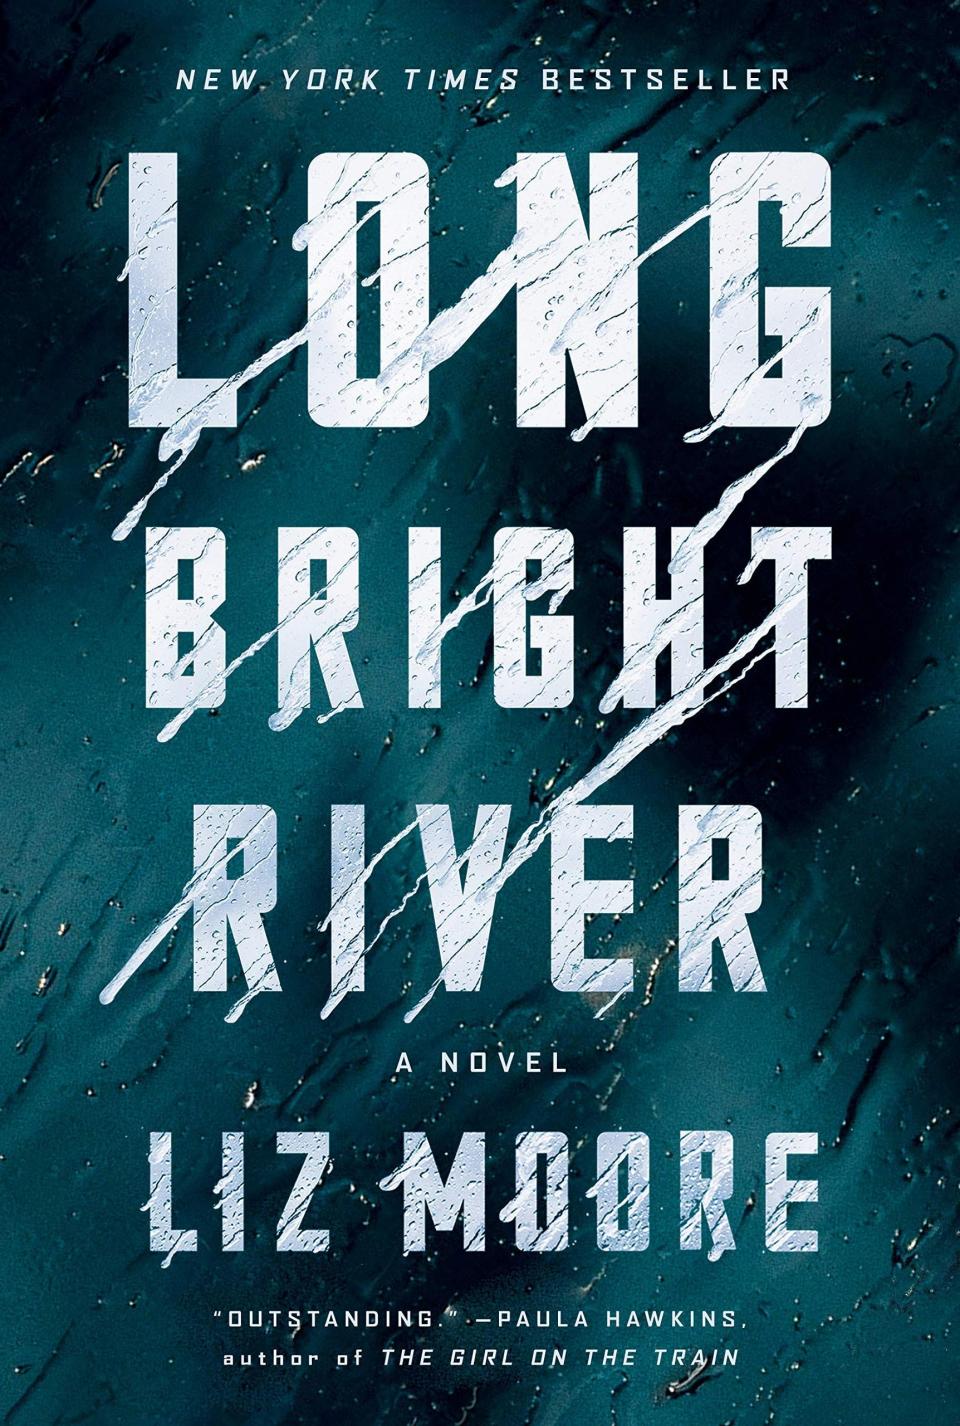 50) 'Long Bright River' by Liz Moore